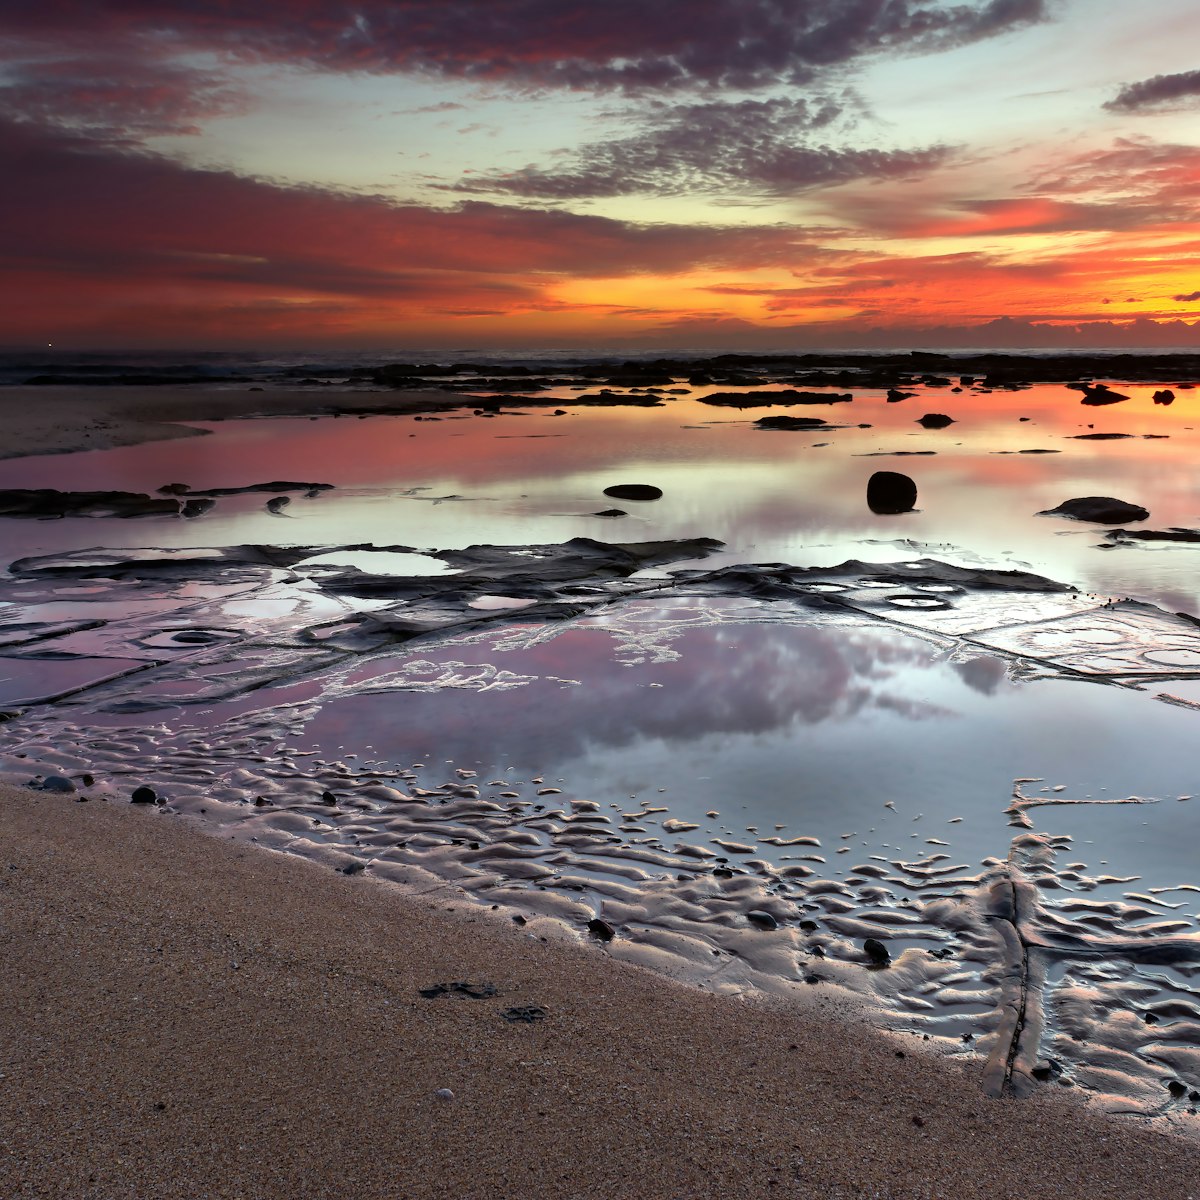 Sunrise over rock pools on the southern end of Shelley beach.